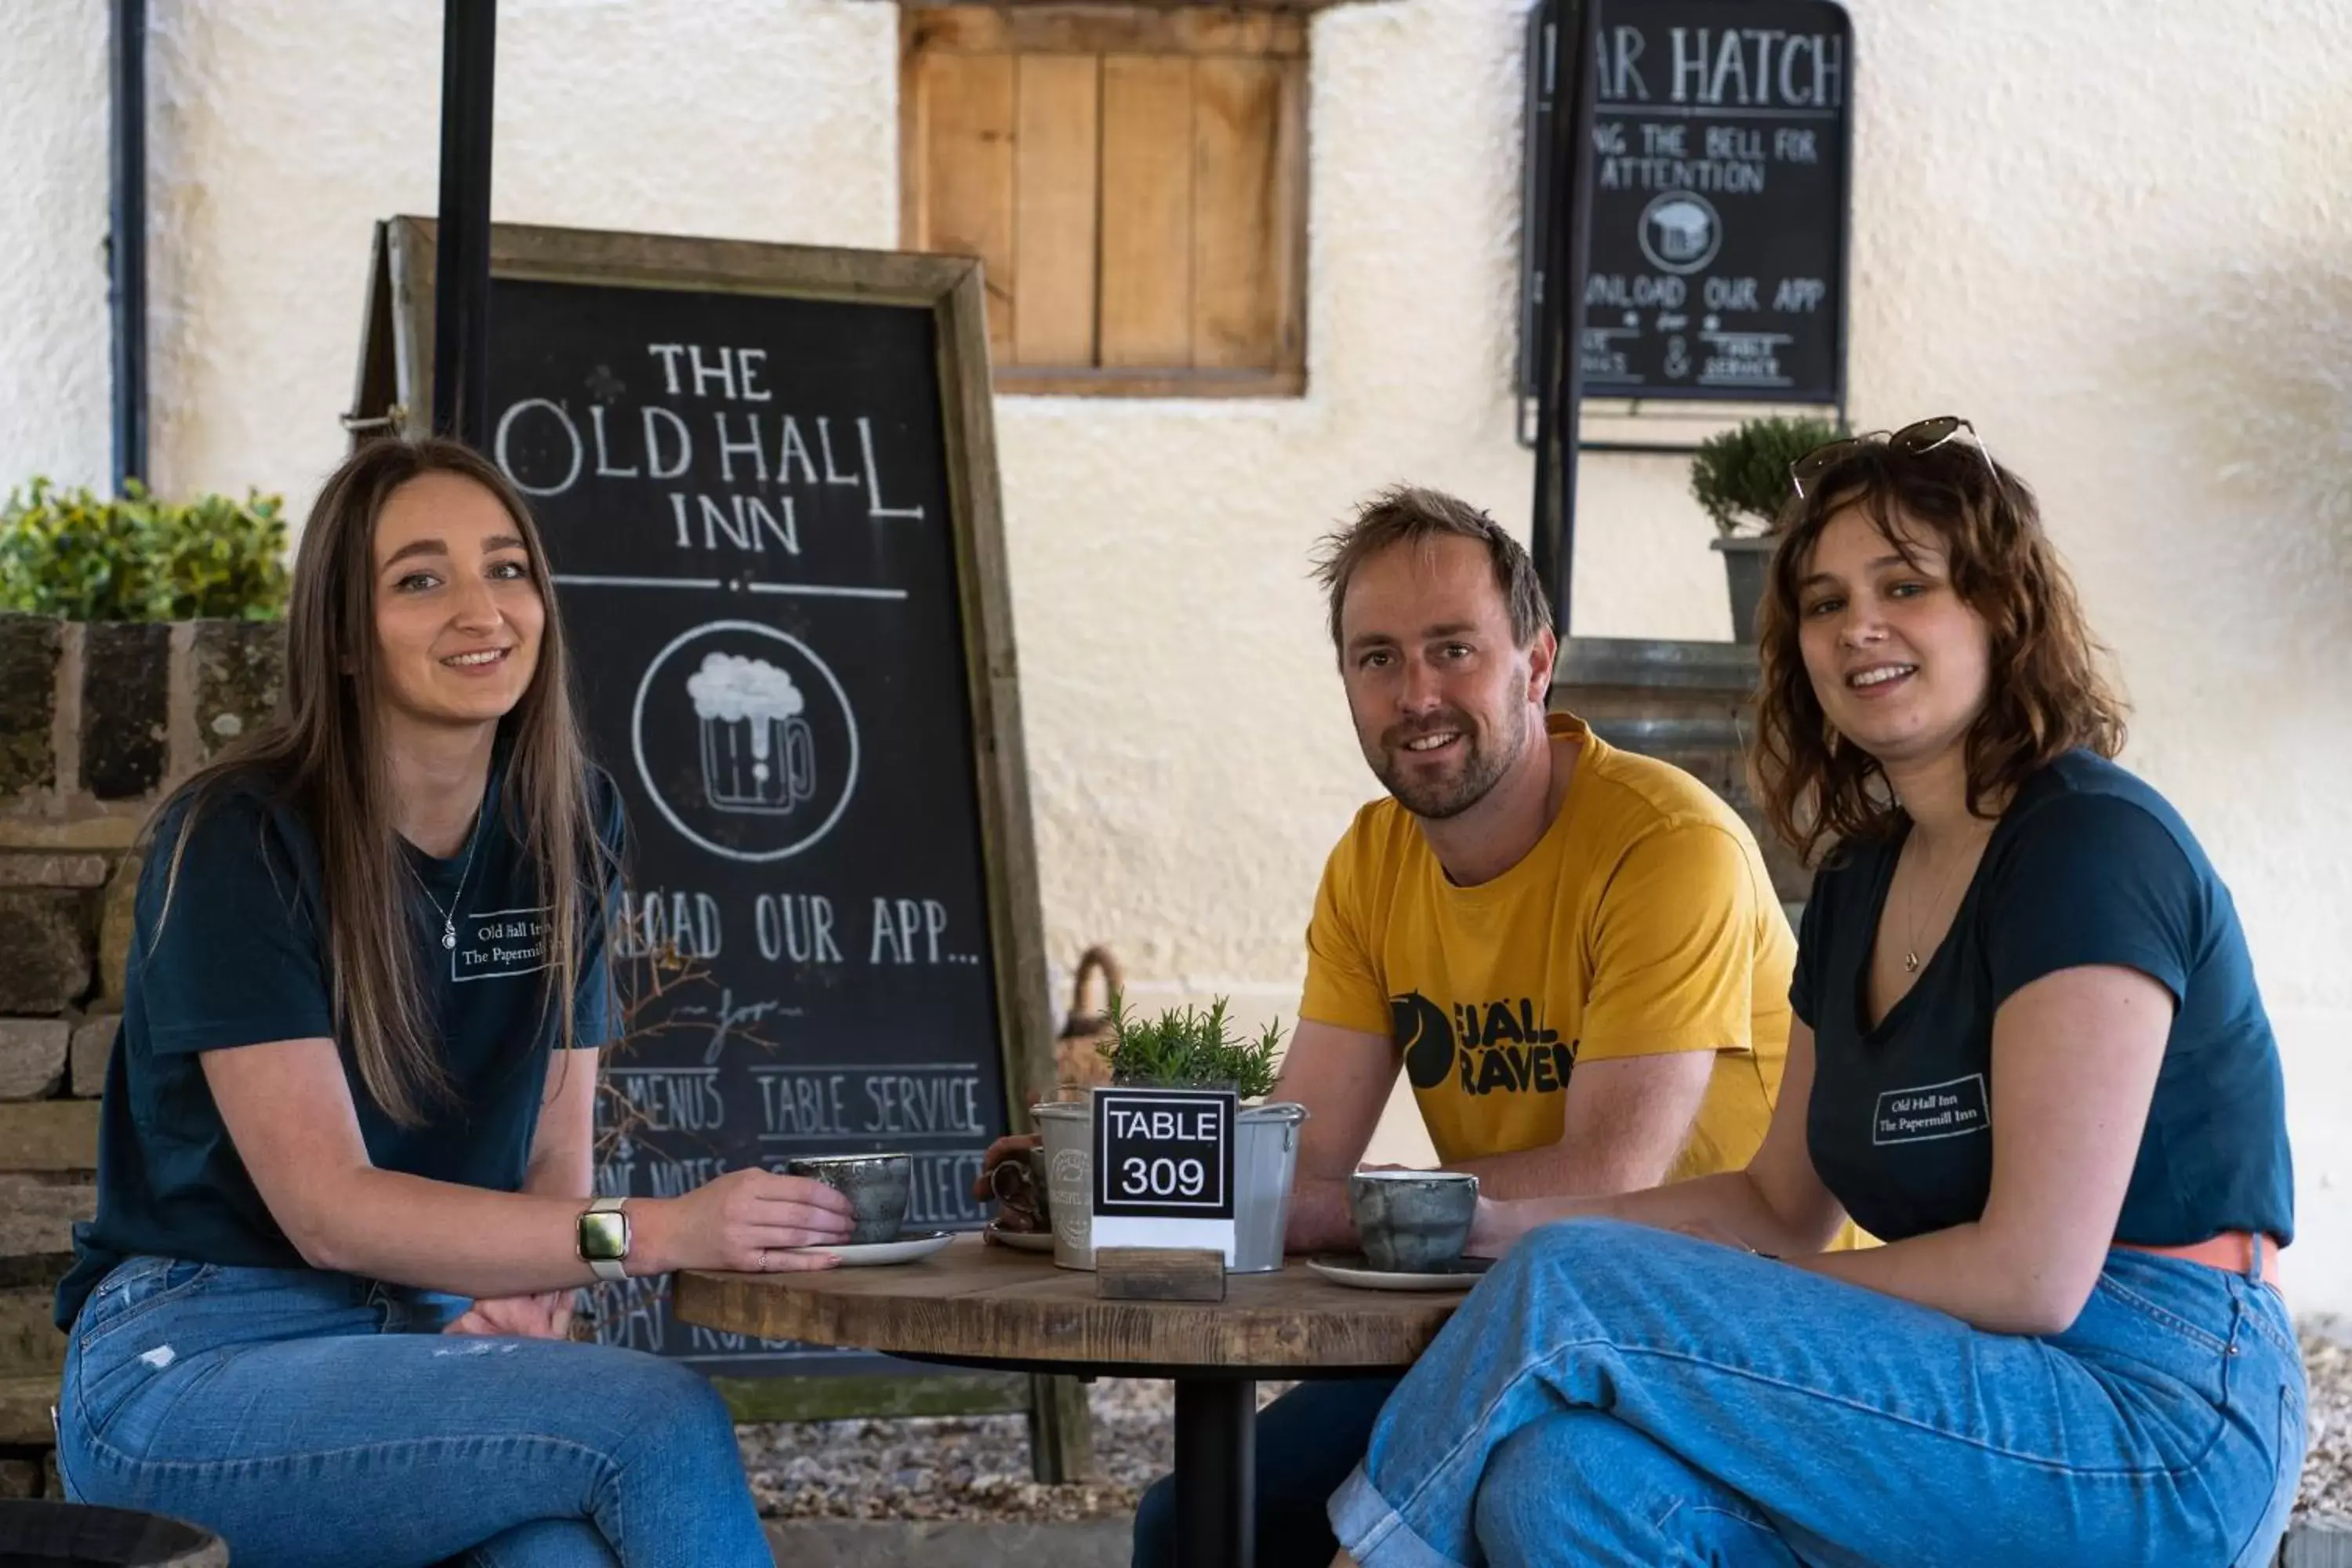 Staff in The Old Hall Inn